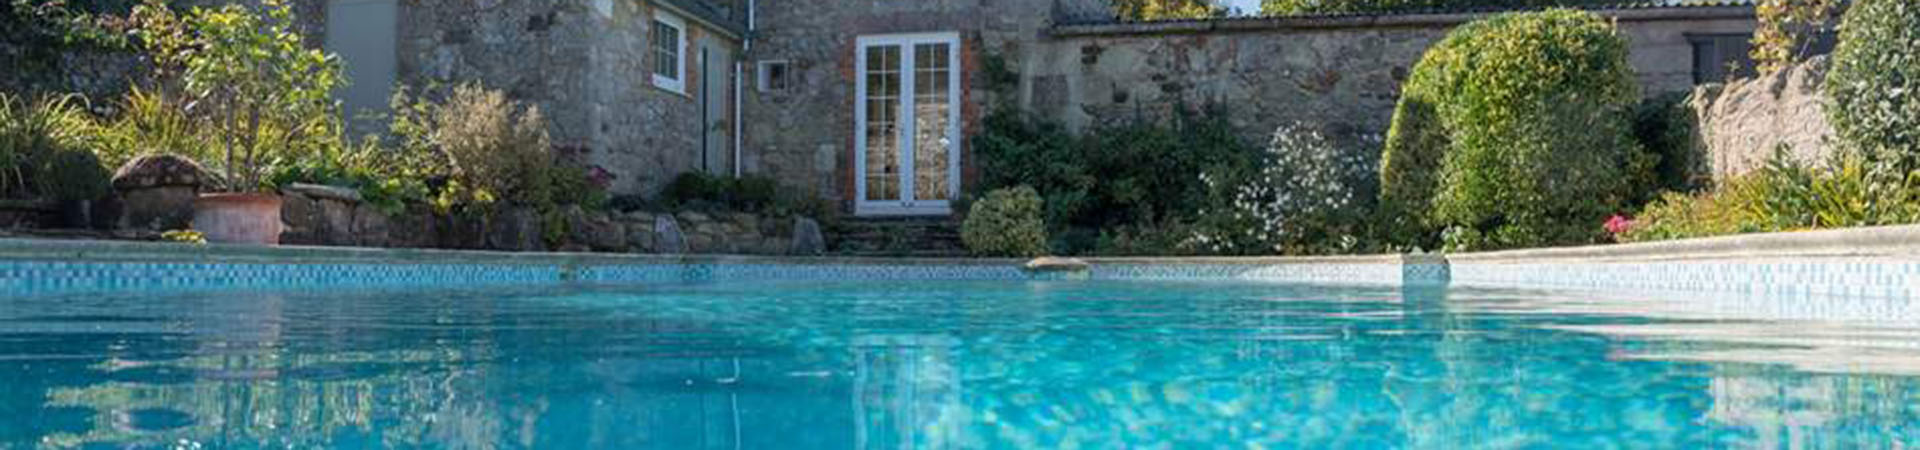 Holiday cottages with pools in Wales